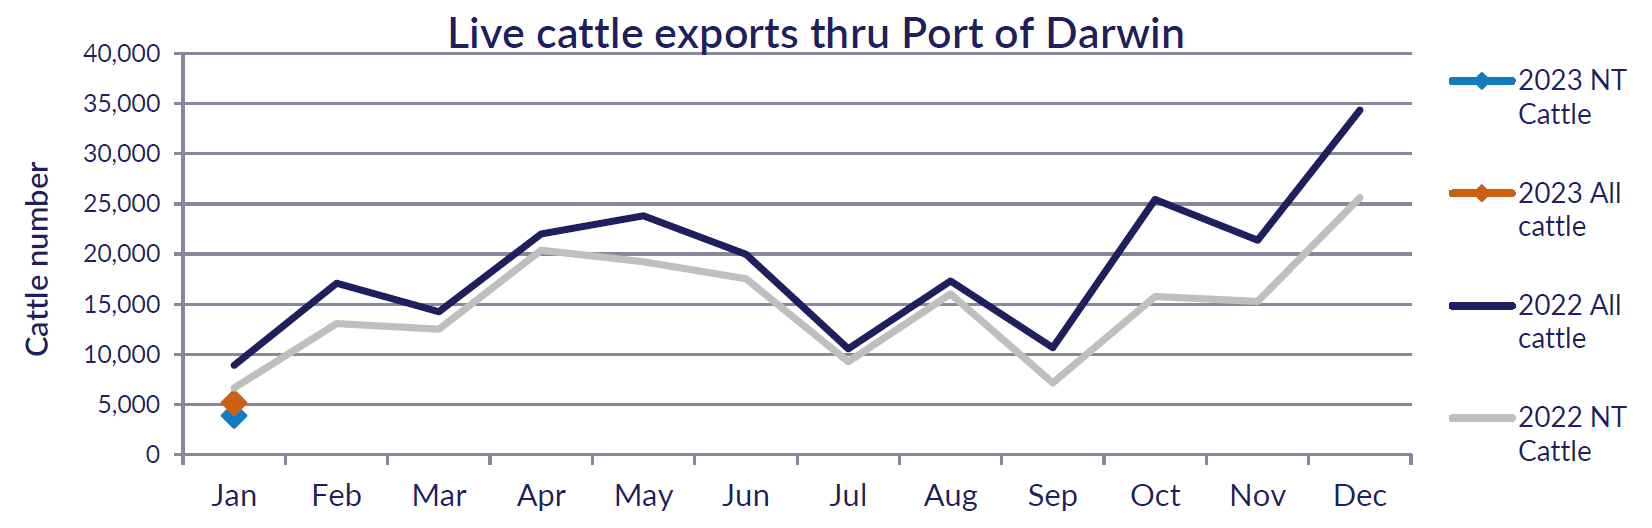 Live cattle exports thru Port of Darwin - January 2023